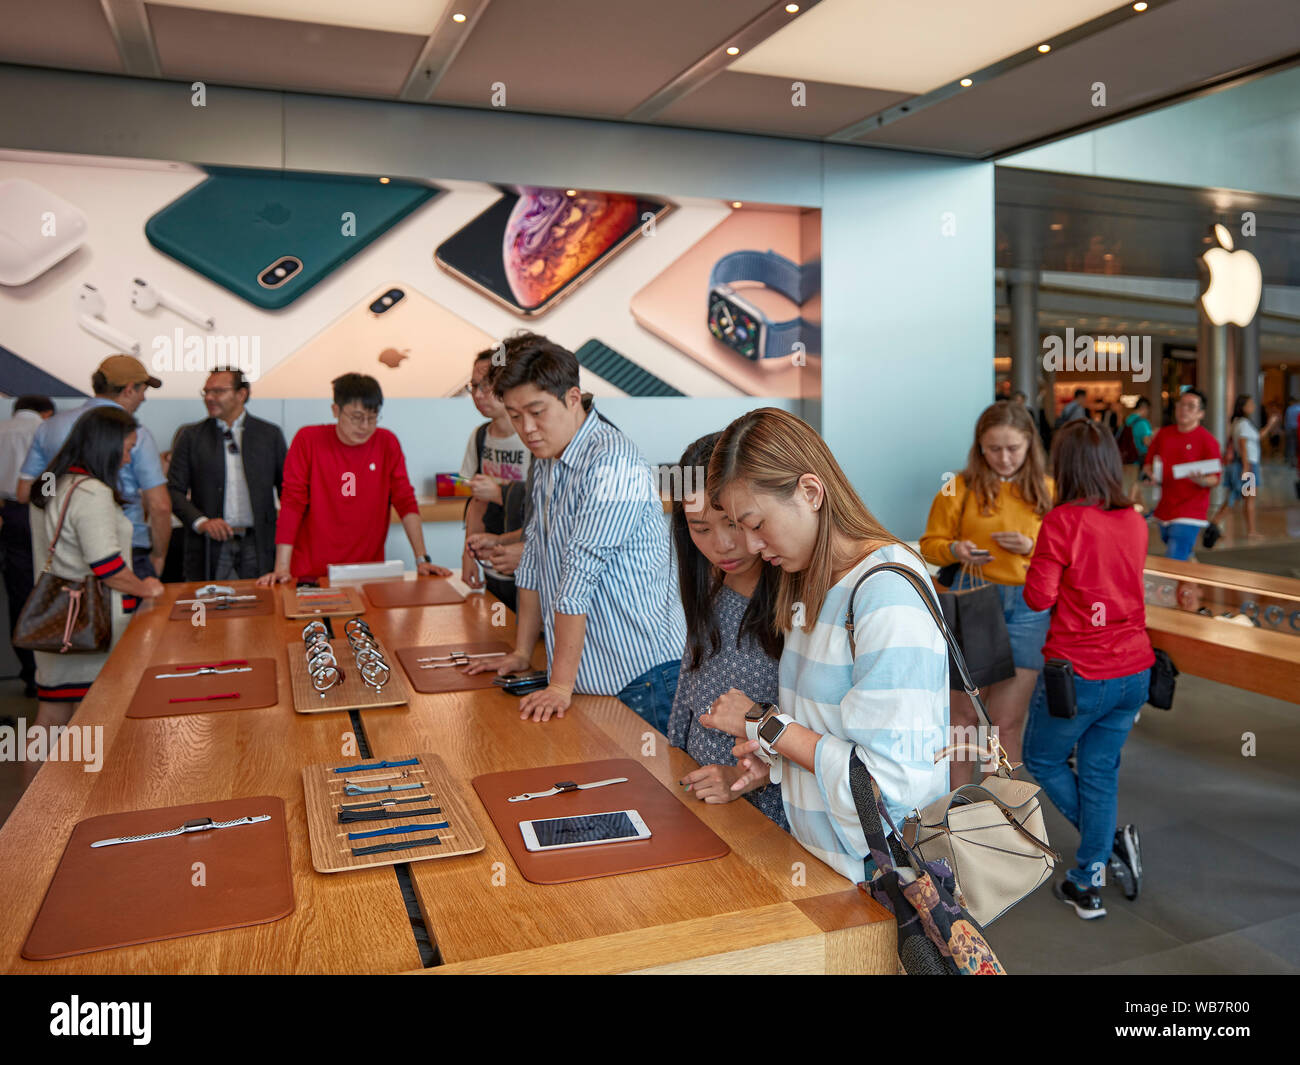 Customers at an Apple Store Looking at a Display Case of Apple Watches  Editorial Photo - Image of modern, global: 237139141